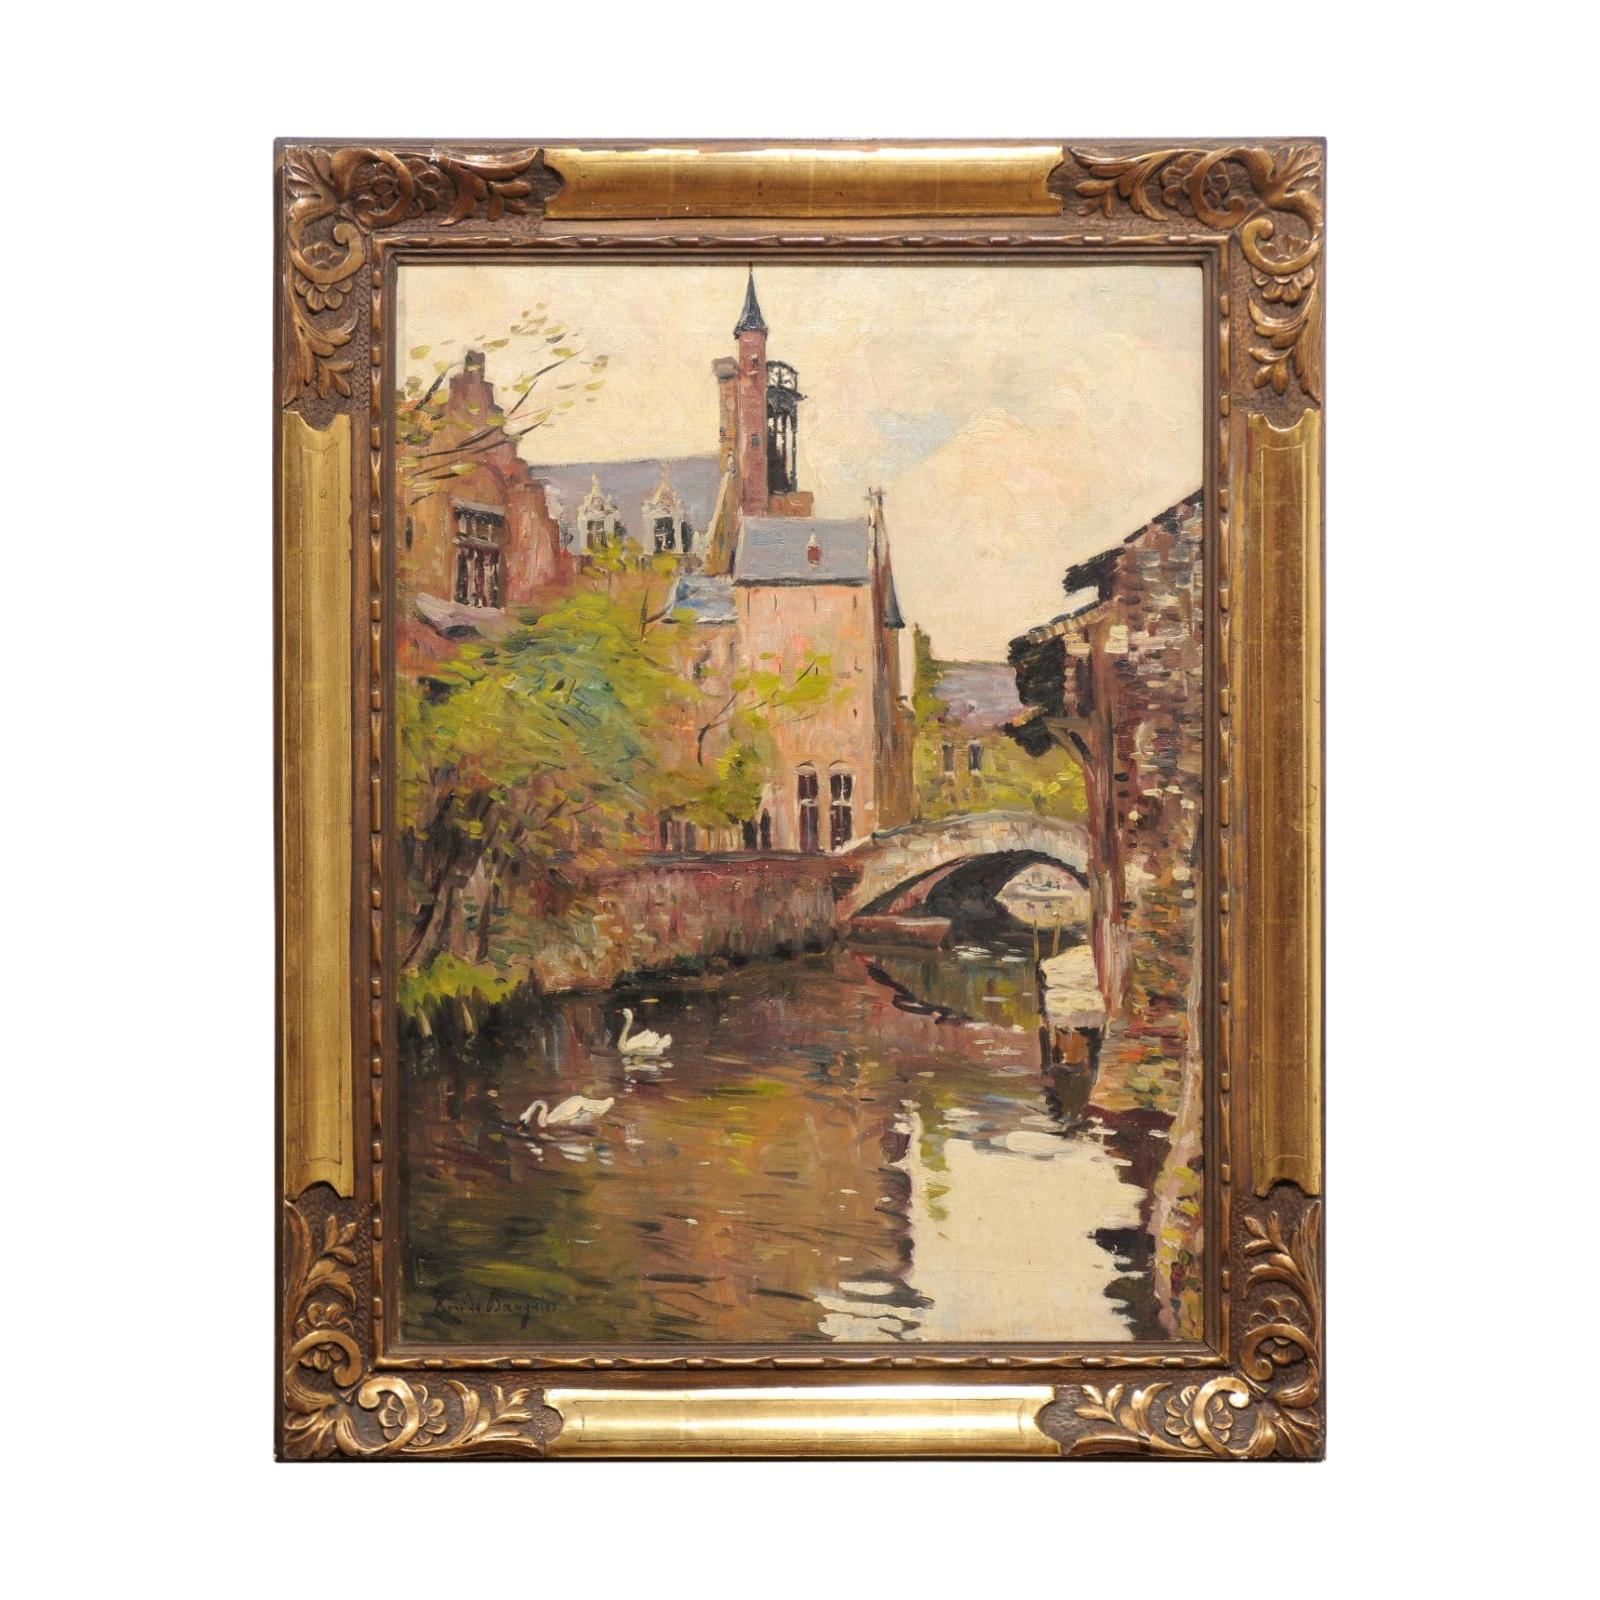 English Oil on Canvas Painting in Carved Frame Depicting a Serene Town Scene